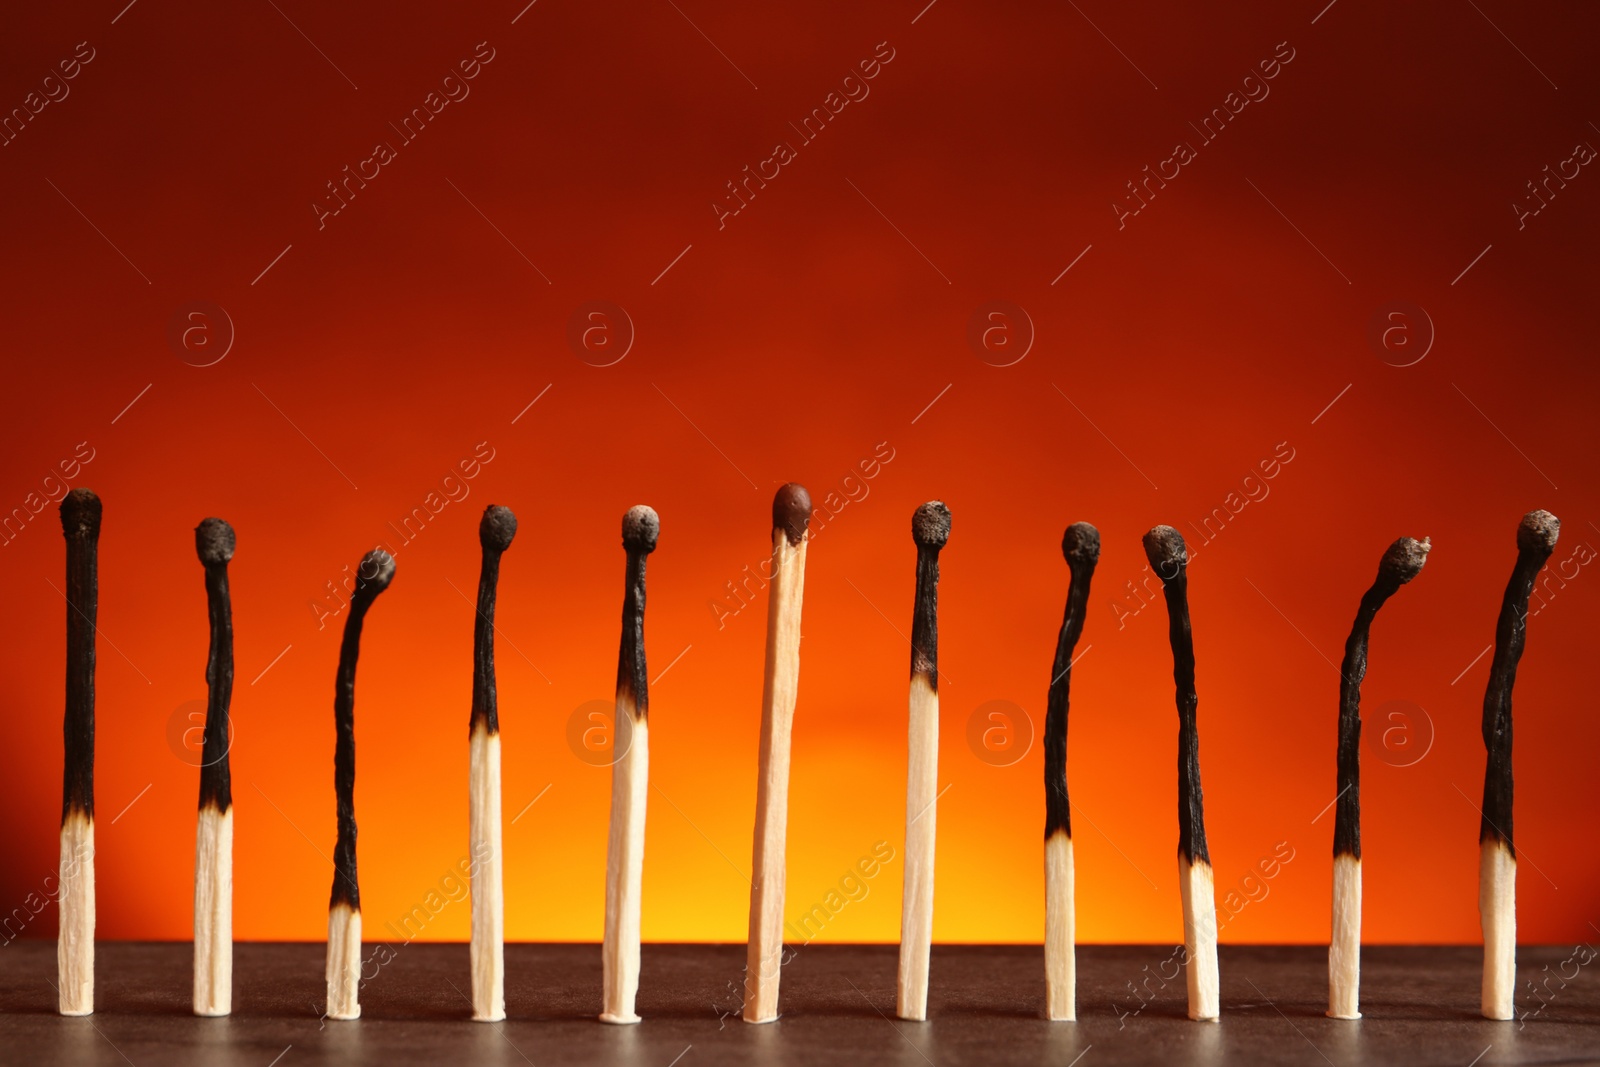 Photo of Whole match among burnt ones on table against color background. Uniqueness and difference concept